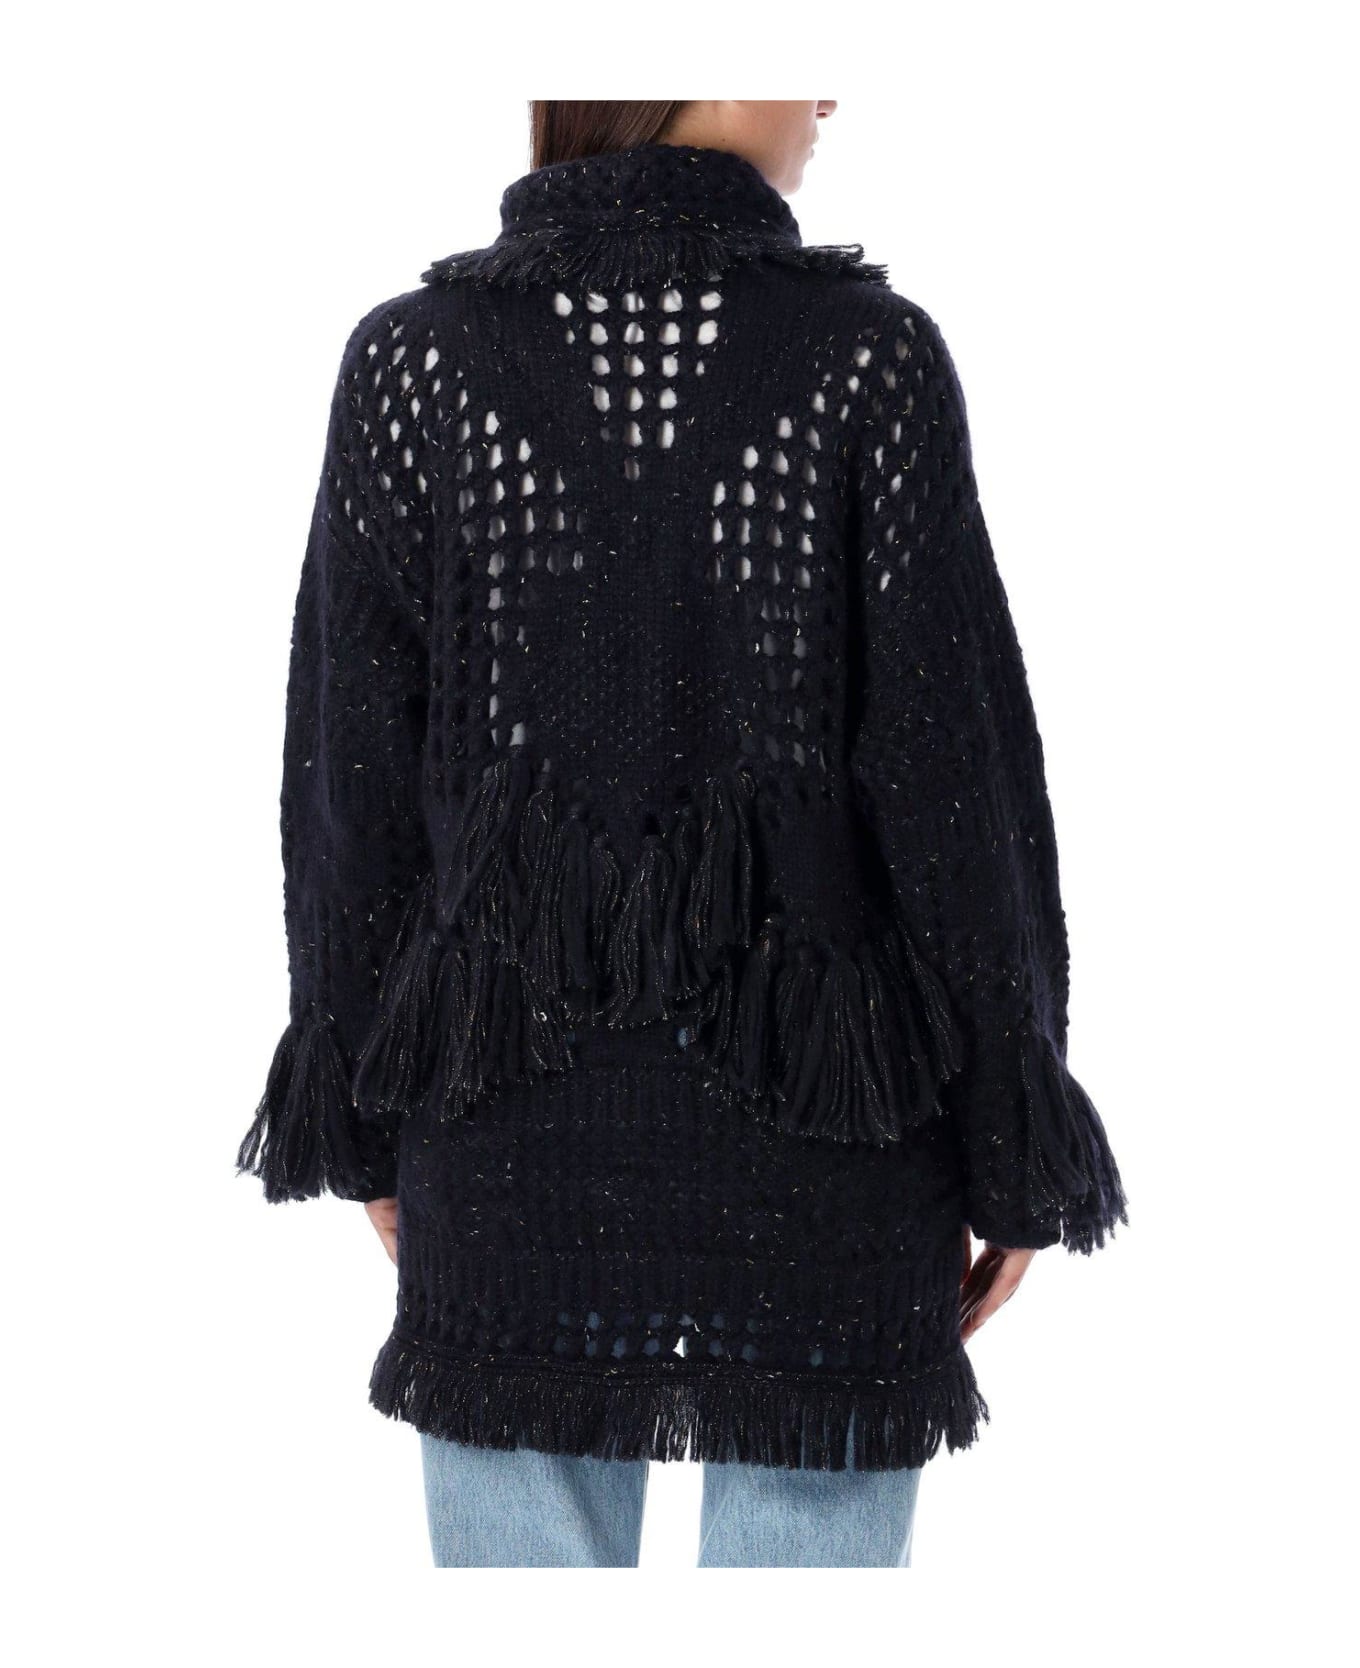 Alanui The Astral Speckle Knitted Fringed Cardigan - Blu コート